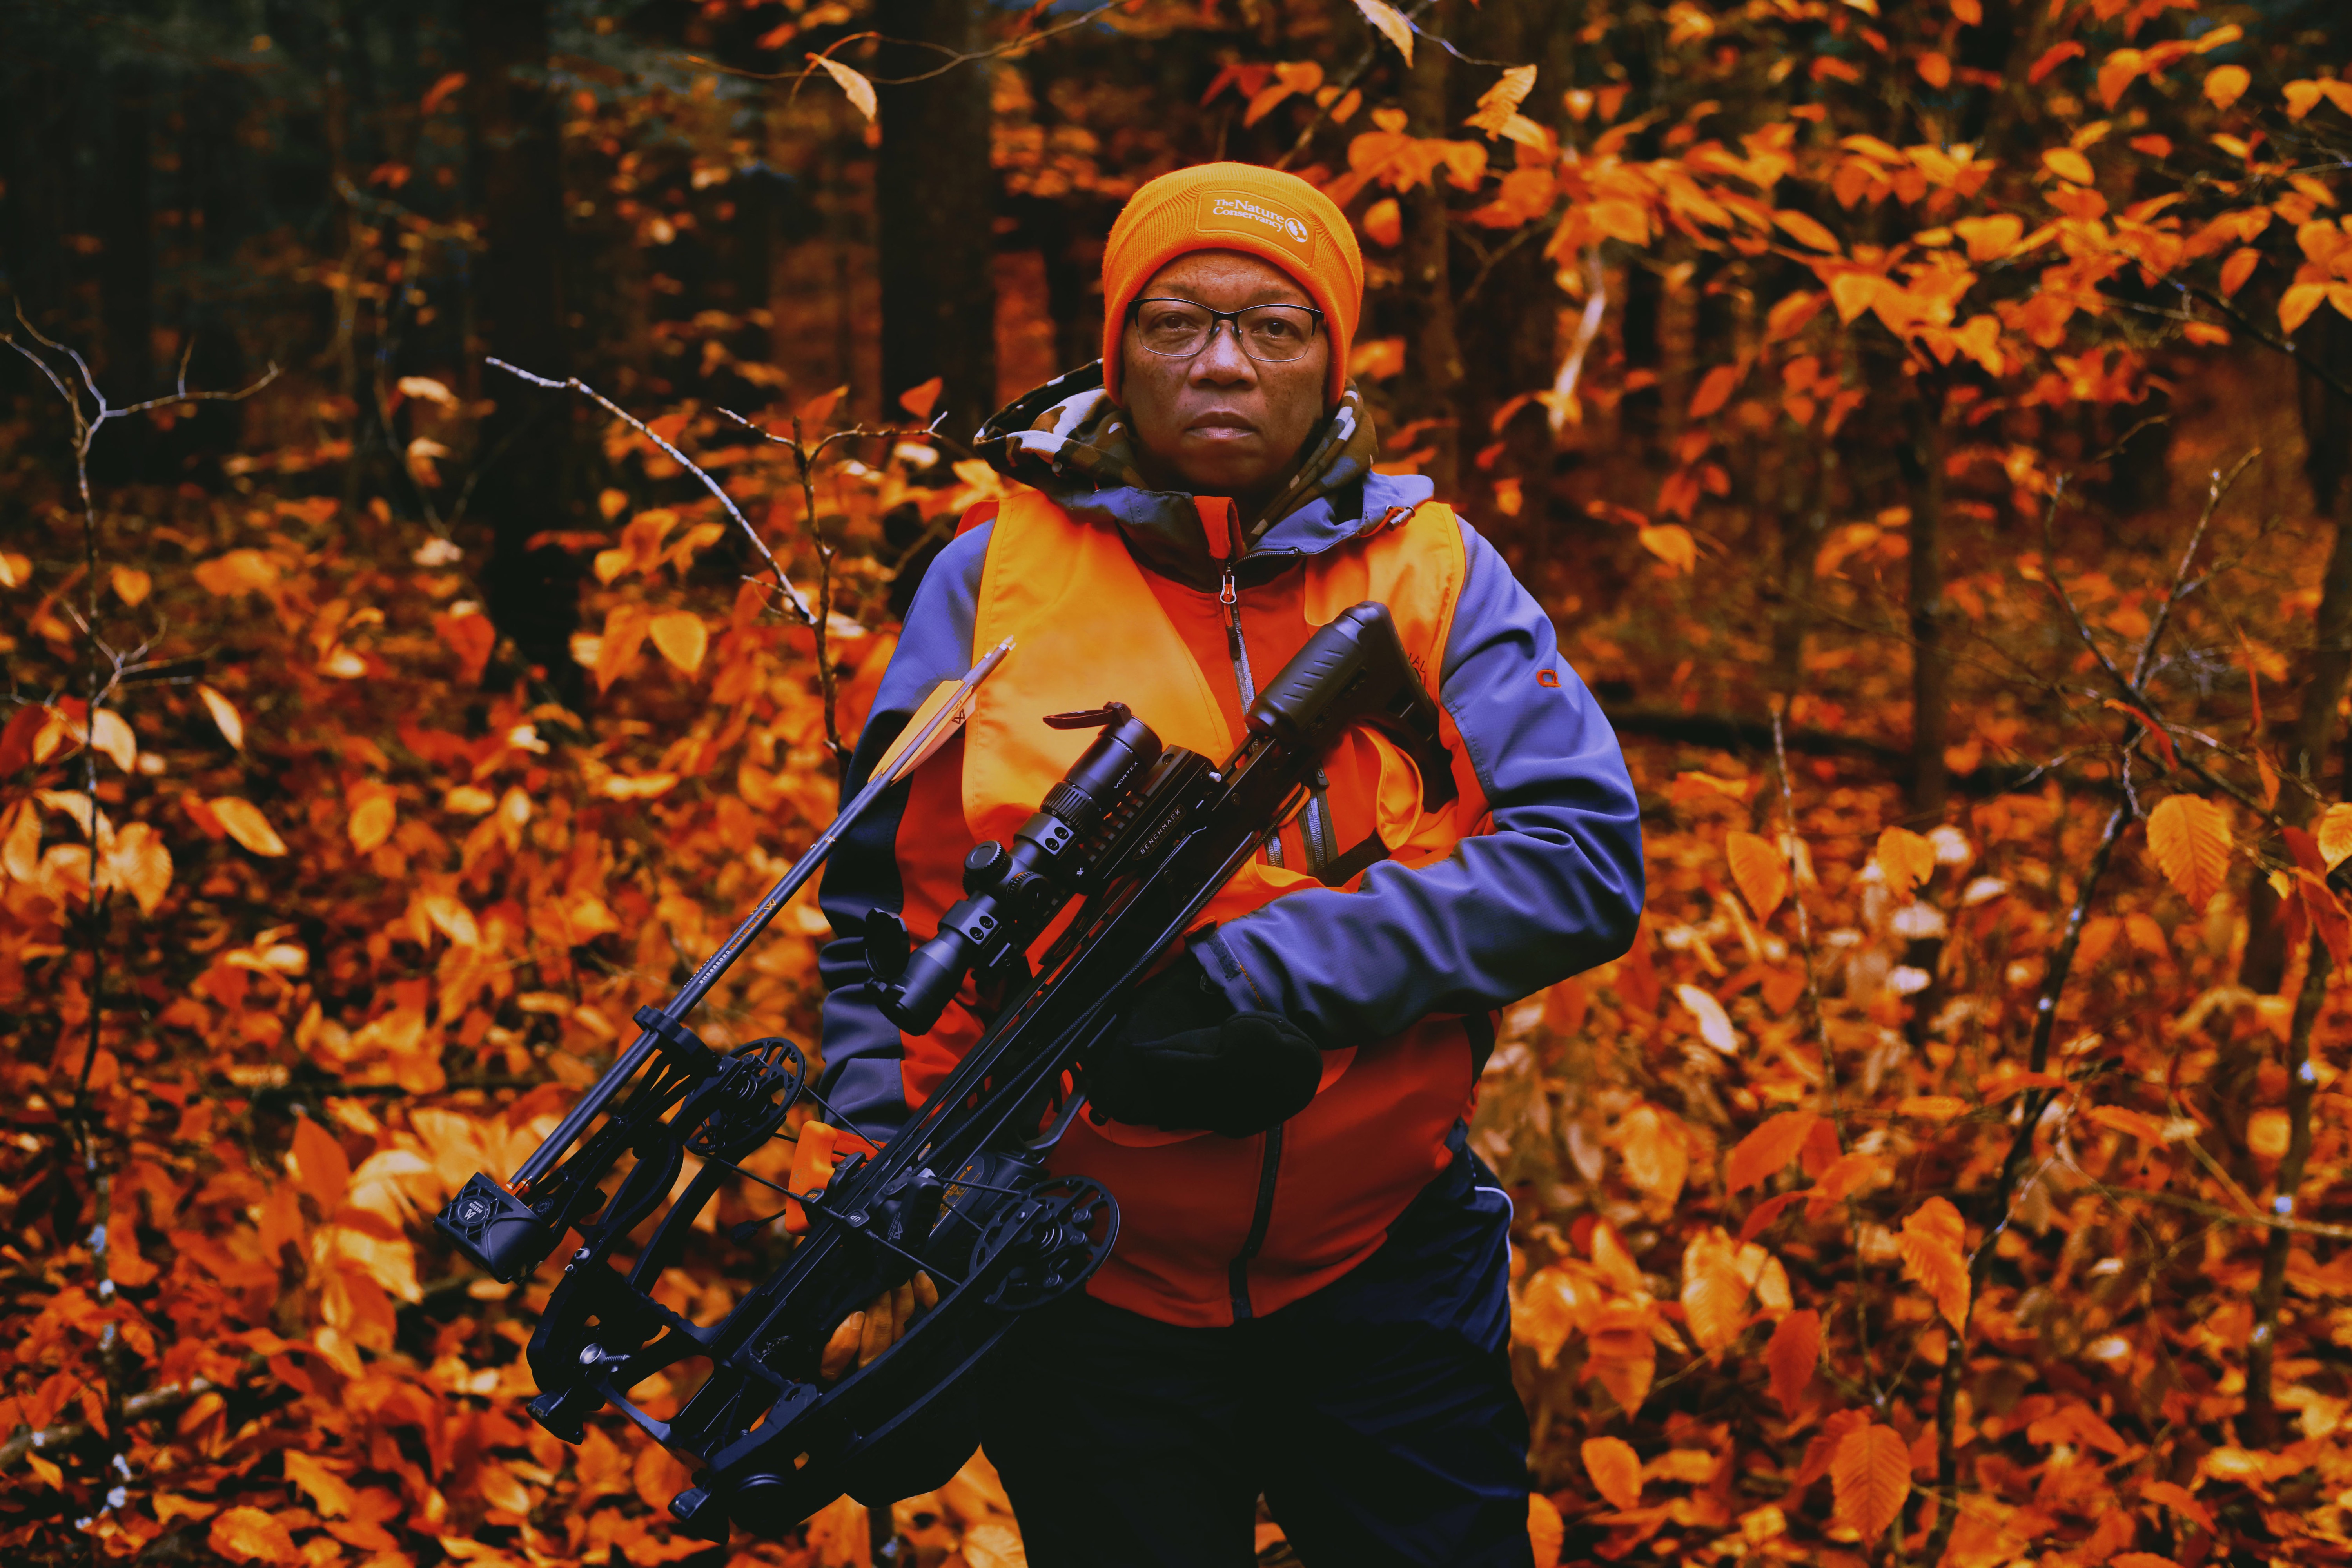 A photo of Benita Law-Diao holding hunting equipment.